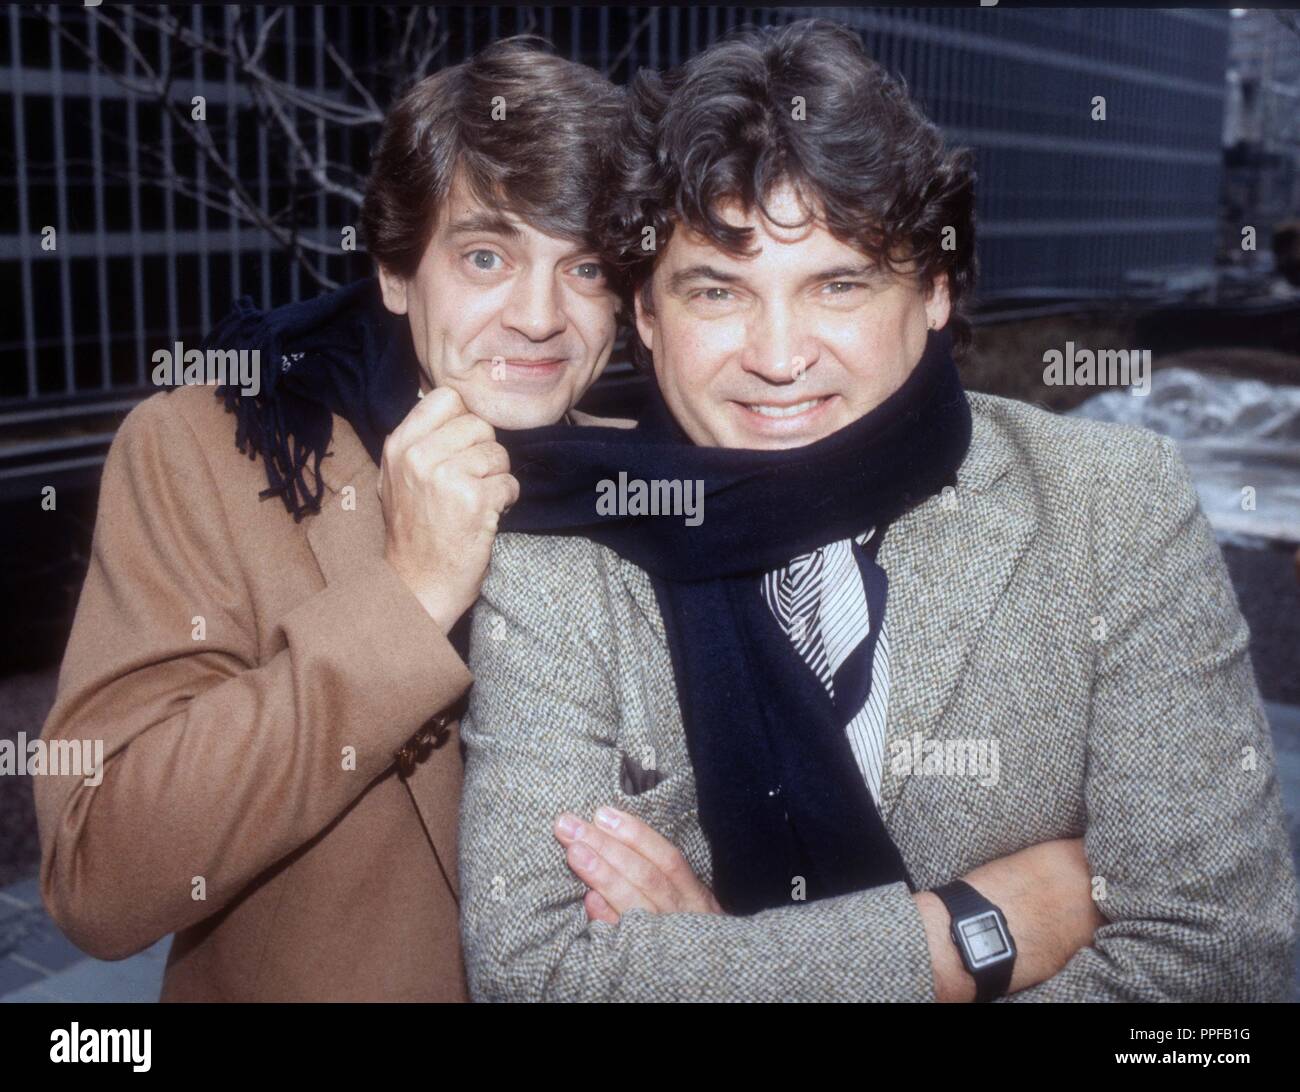 Phil Everly Don Everly 1985 Photo By Adam Scull/PHOTOlink.net Stock Photo